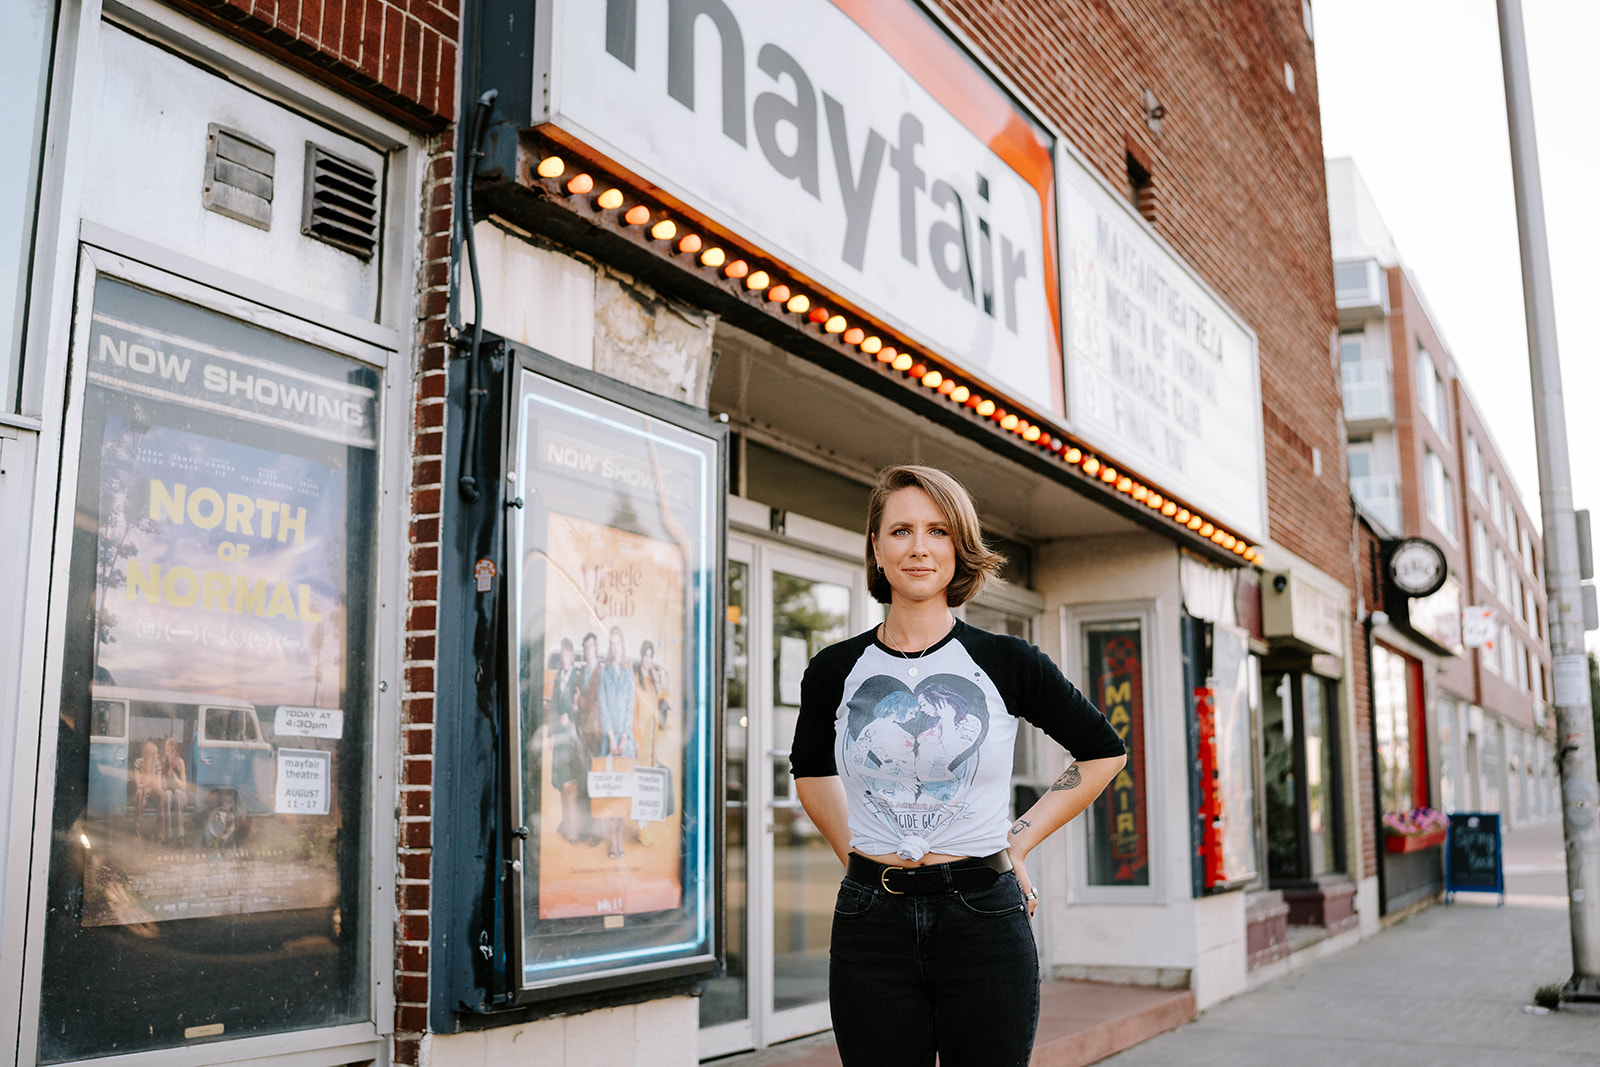 a woman standing in front of the Mayfair Theatre in Ottawa, Ontario, Canada while smiling